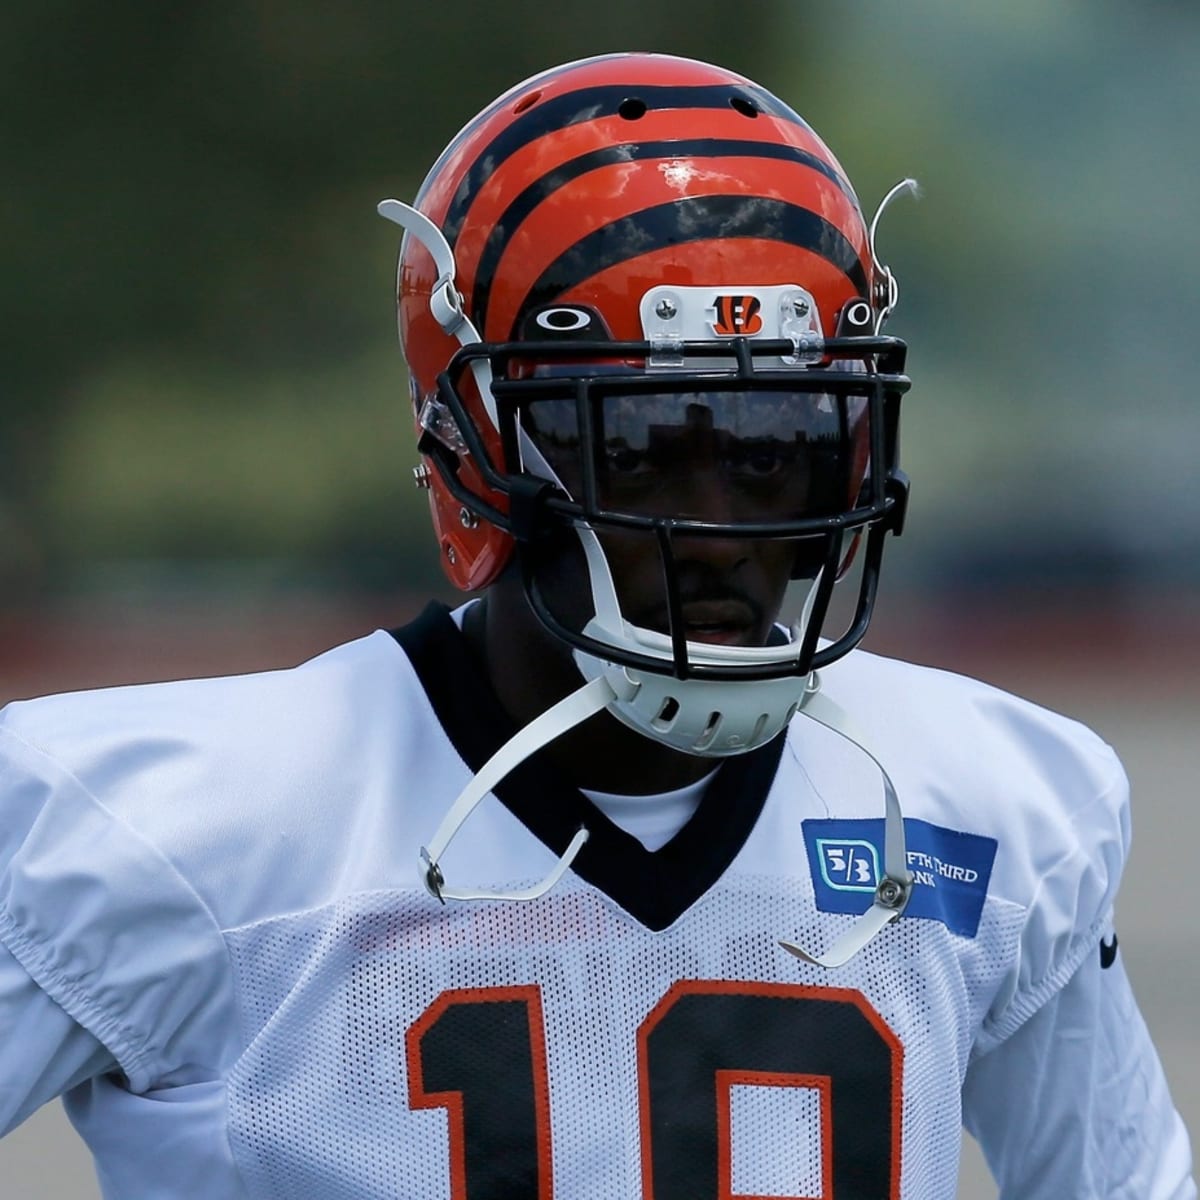 First look of WR AJ Green in Arizona Cardinals jersey